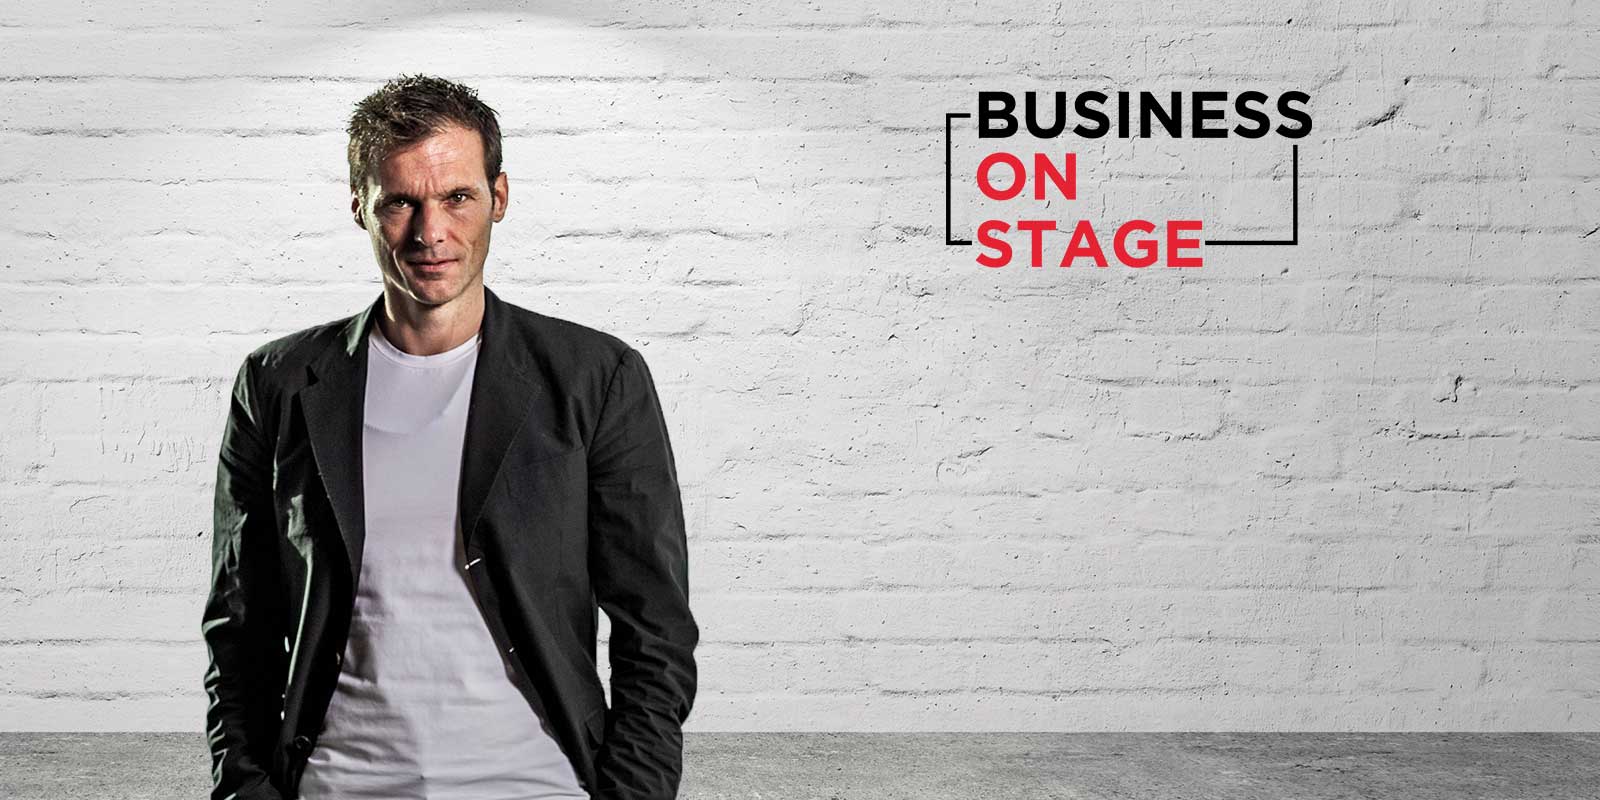 Business on Stage - Quality Bookings